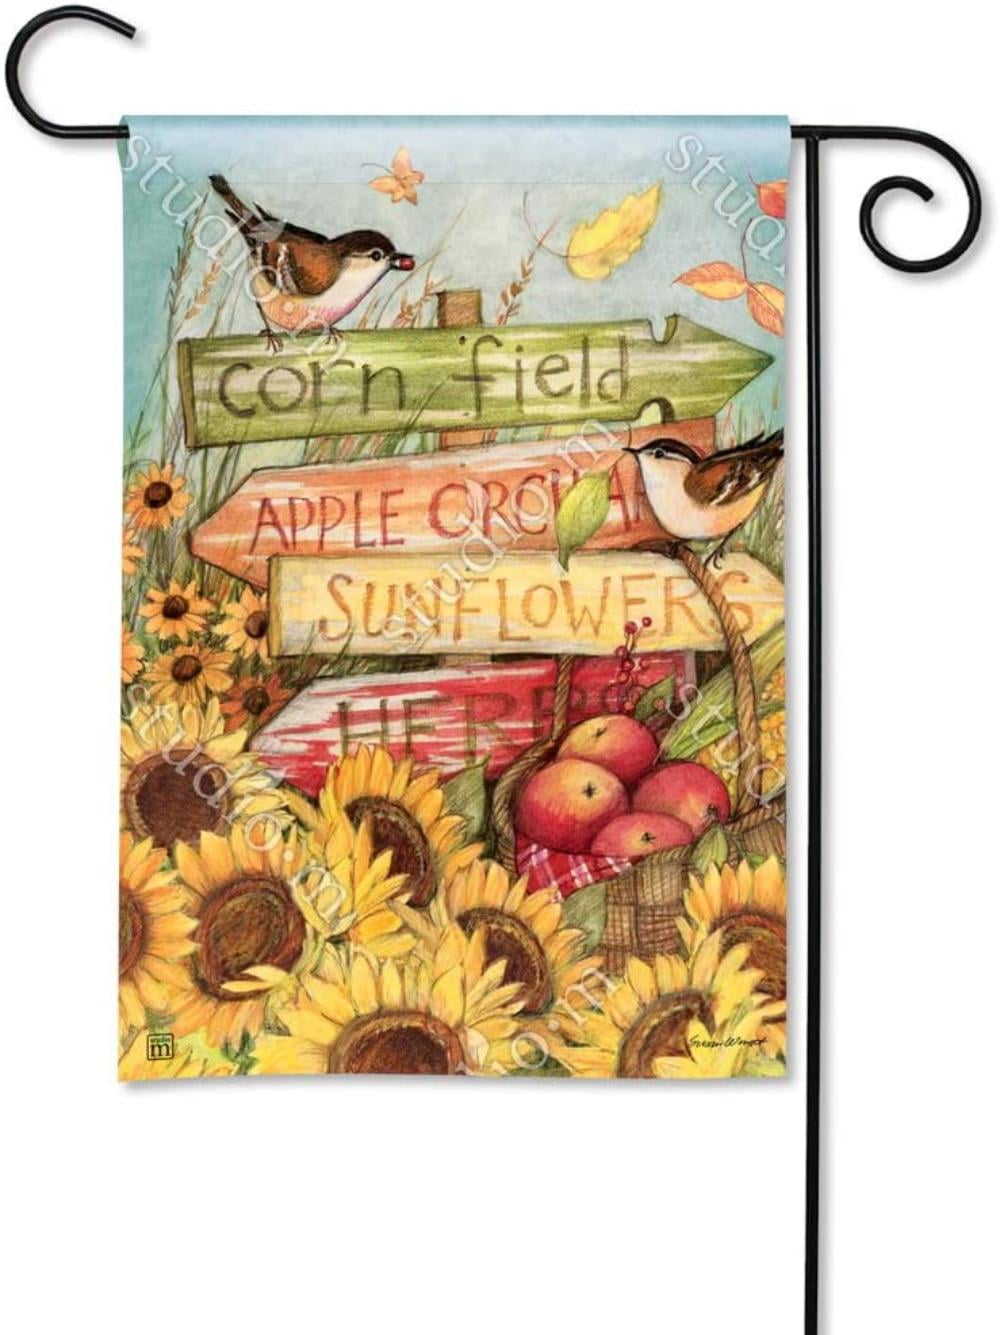 SUSAN WINGET Birds Apples Basket Tree Give Thanks Thanksgiving Greeting Card NEW 